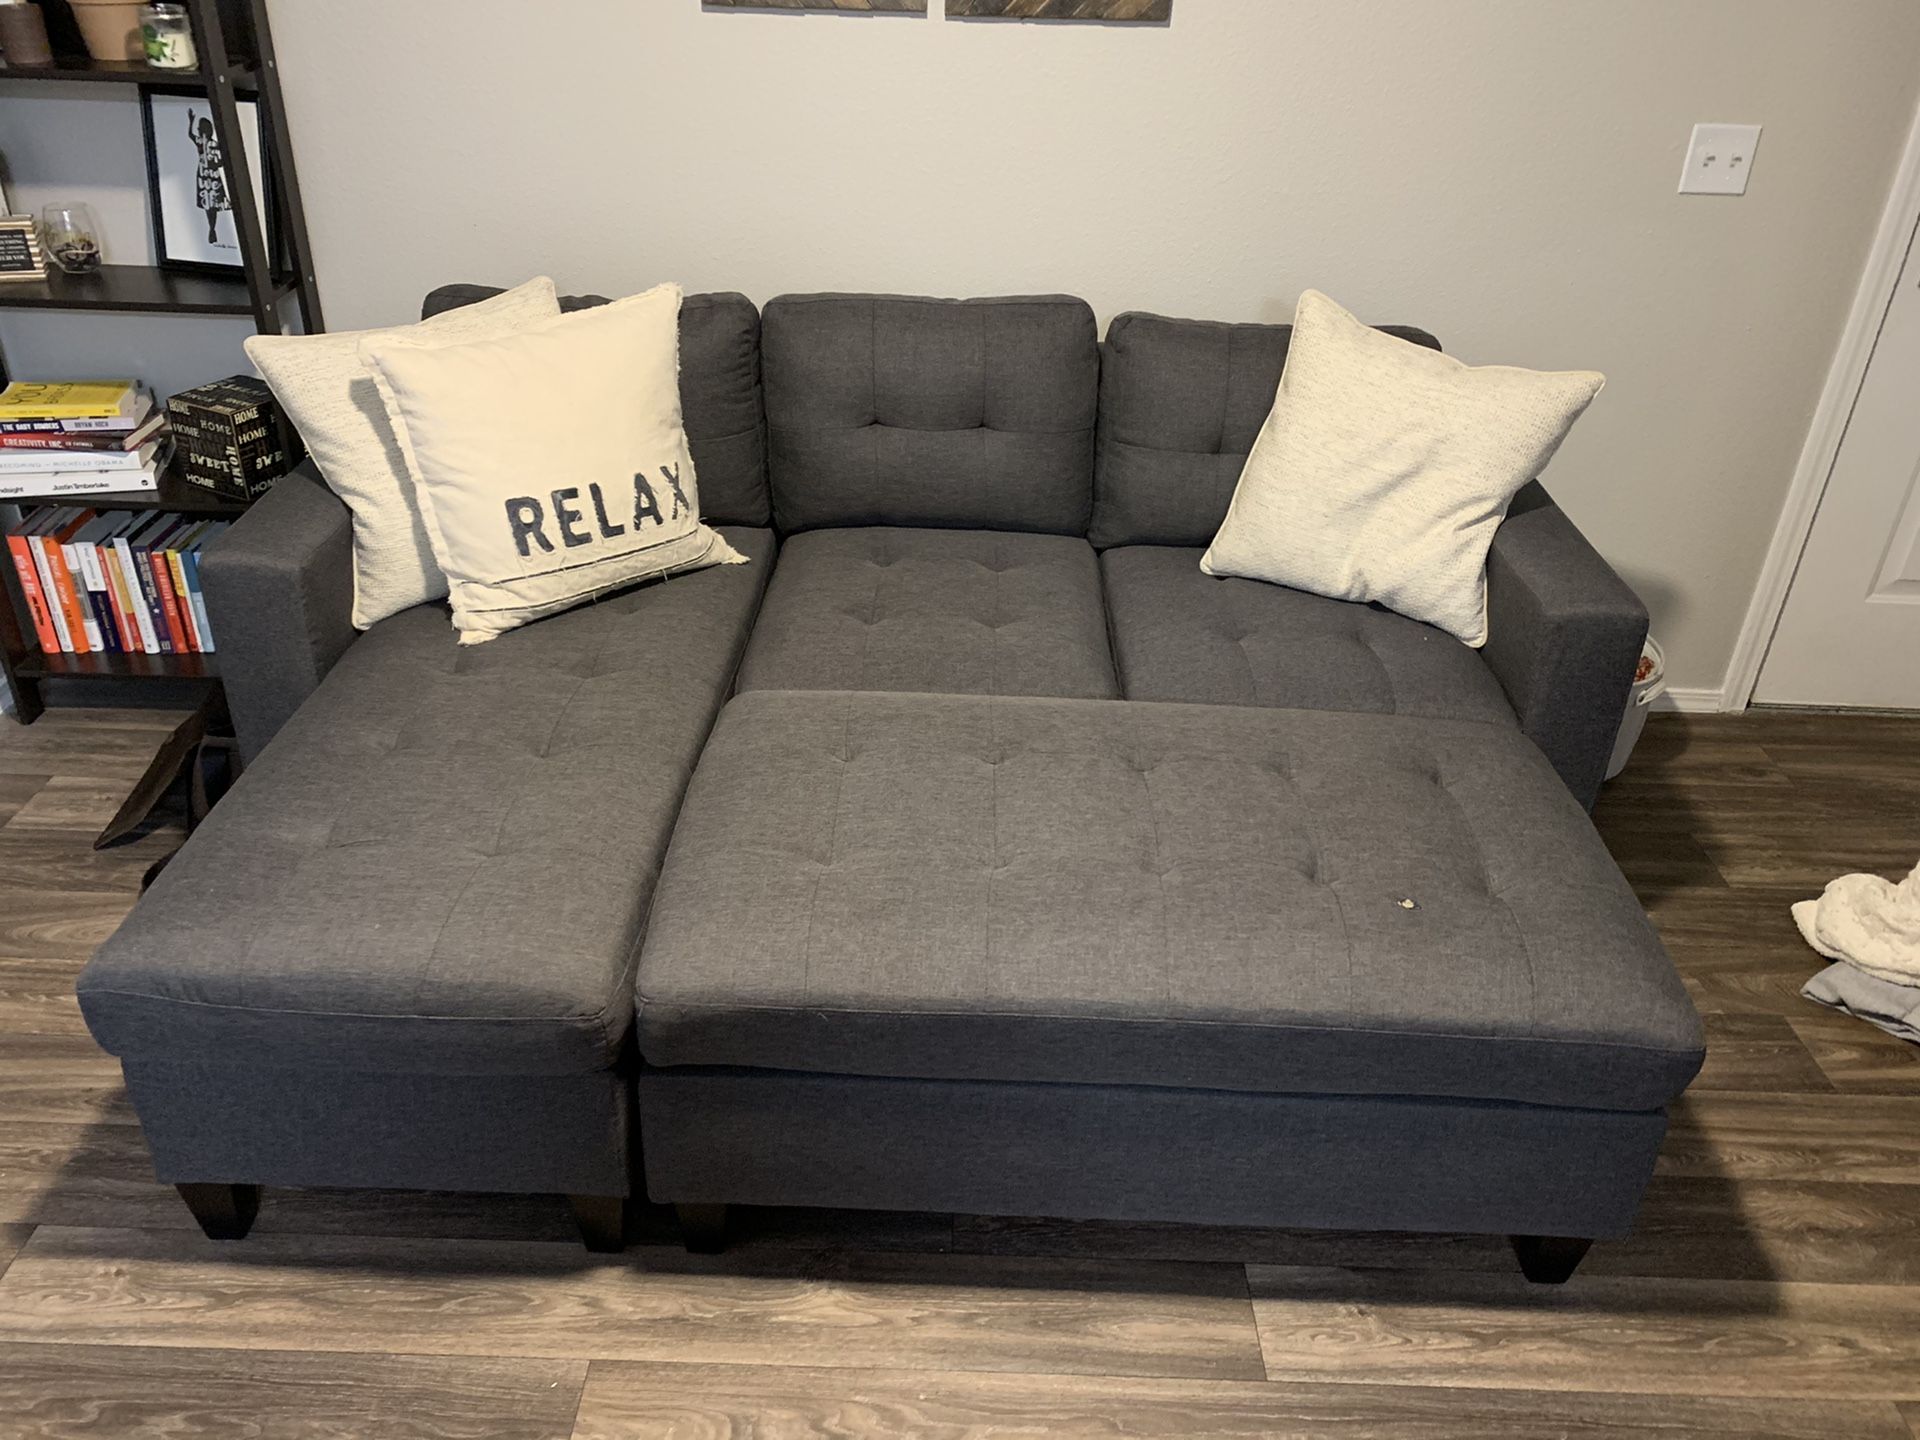 Fairly New, Small Sectional Couch with Ottoman